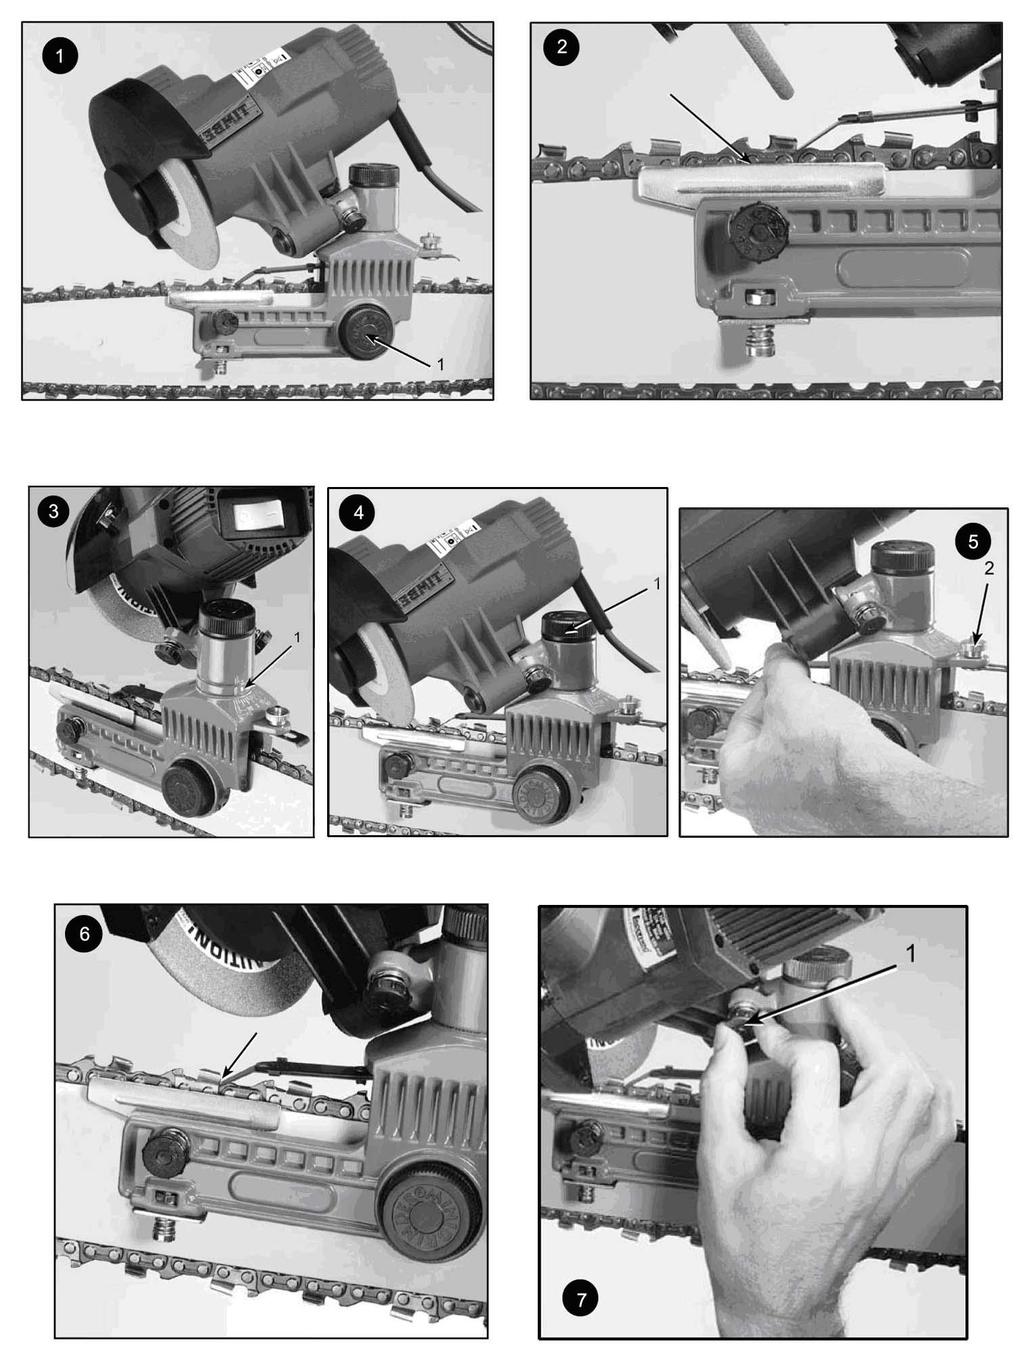 Assembly Instructions 1. Adjust the black knob to attach the chainsaw sharpener on the saw bar tightly. 2. Attach the chain on the groove of the bar-mount. 3.